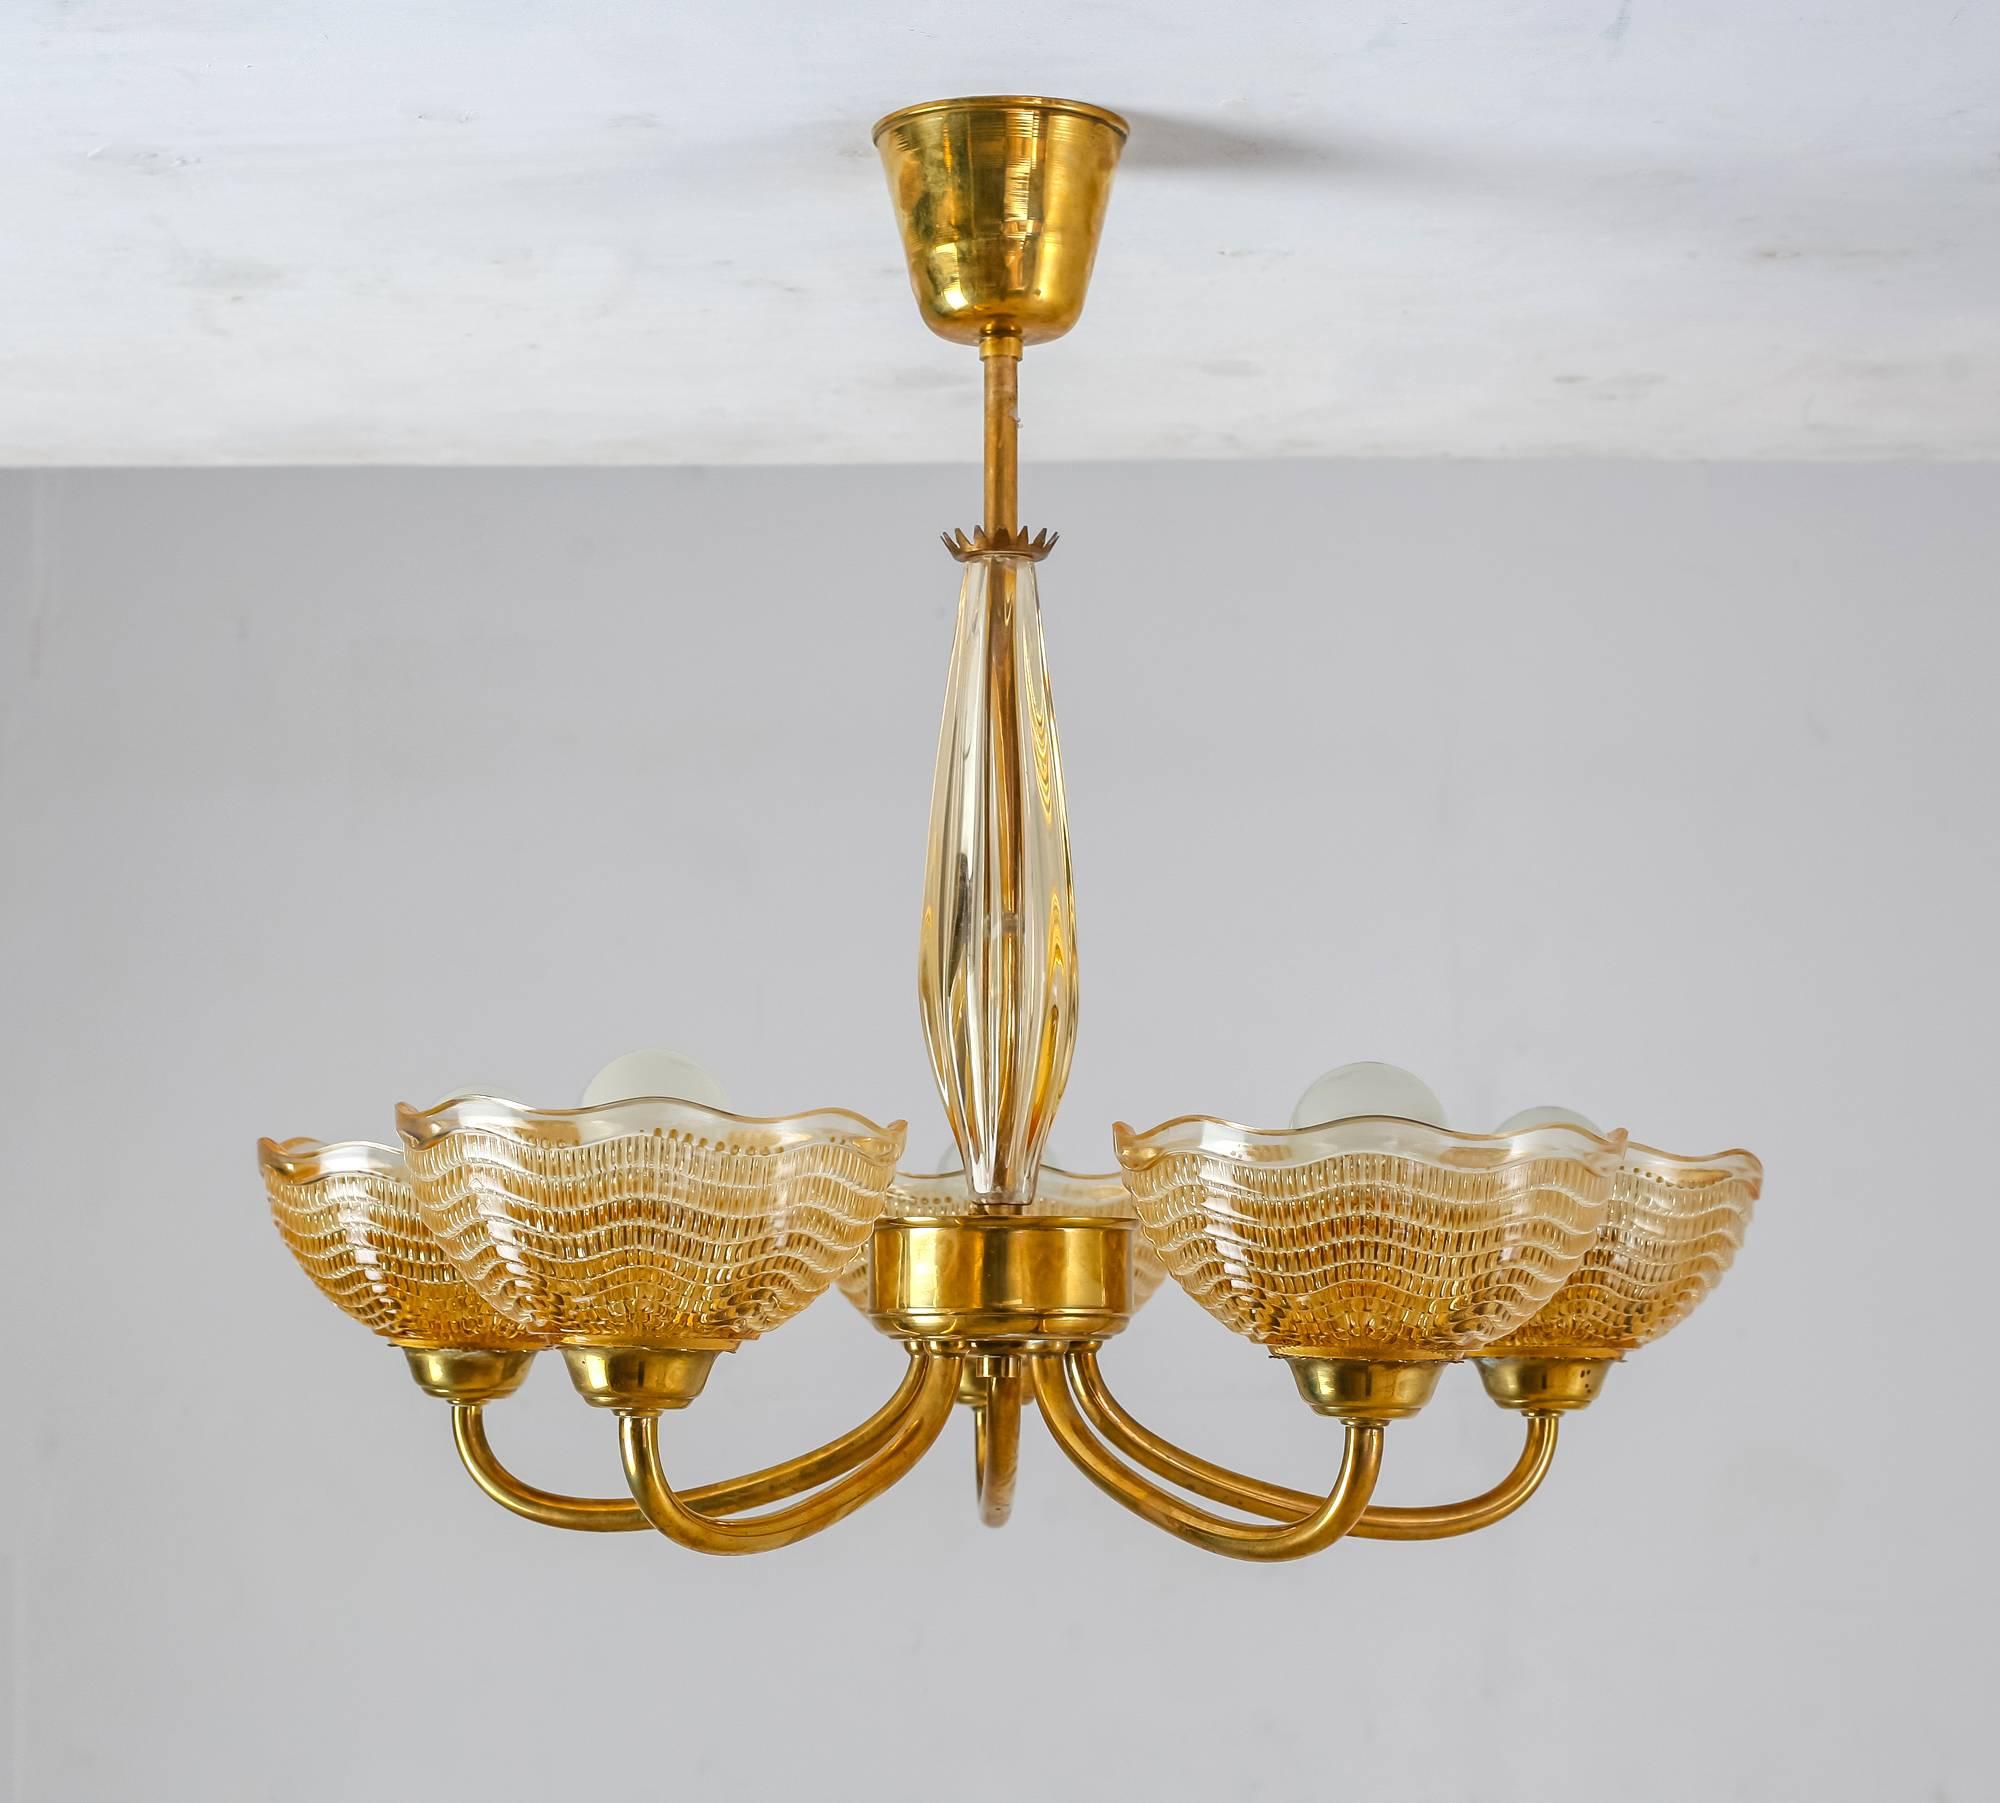 Swedish Orrefors Brass and Yellow Glass Five-Arm Chandelier, Sweden, 1940s For Sale